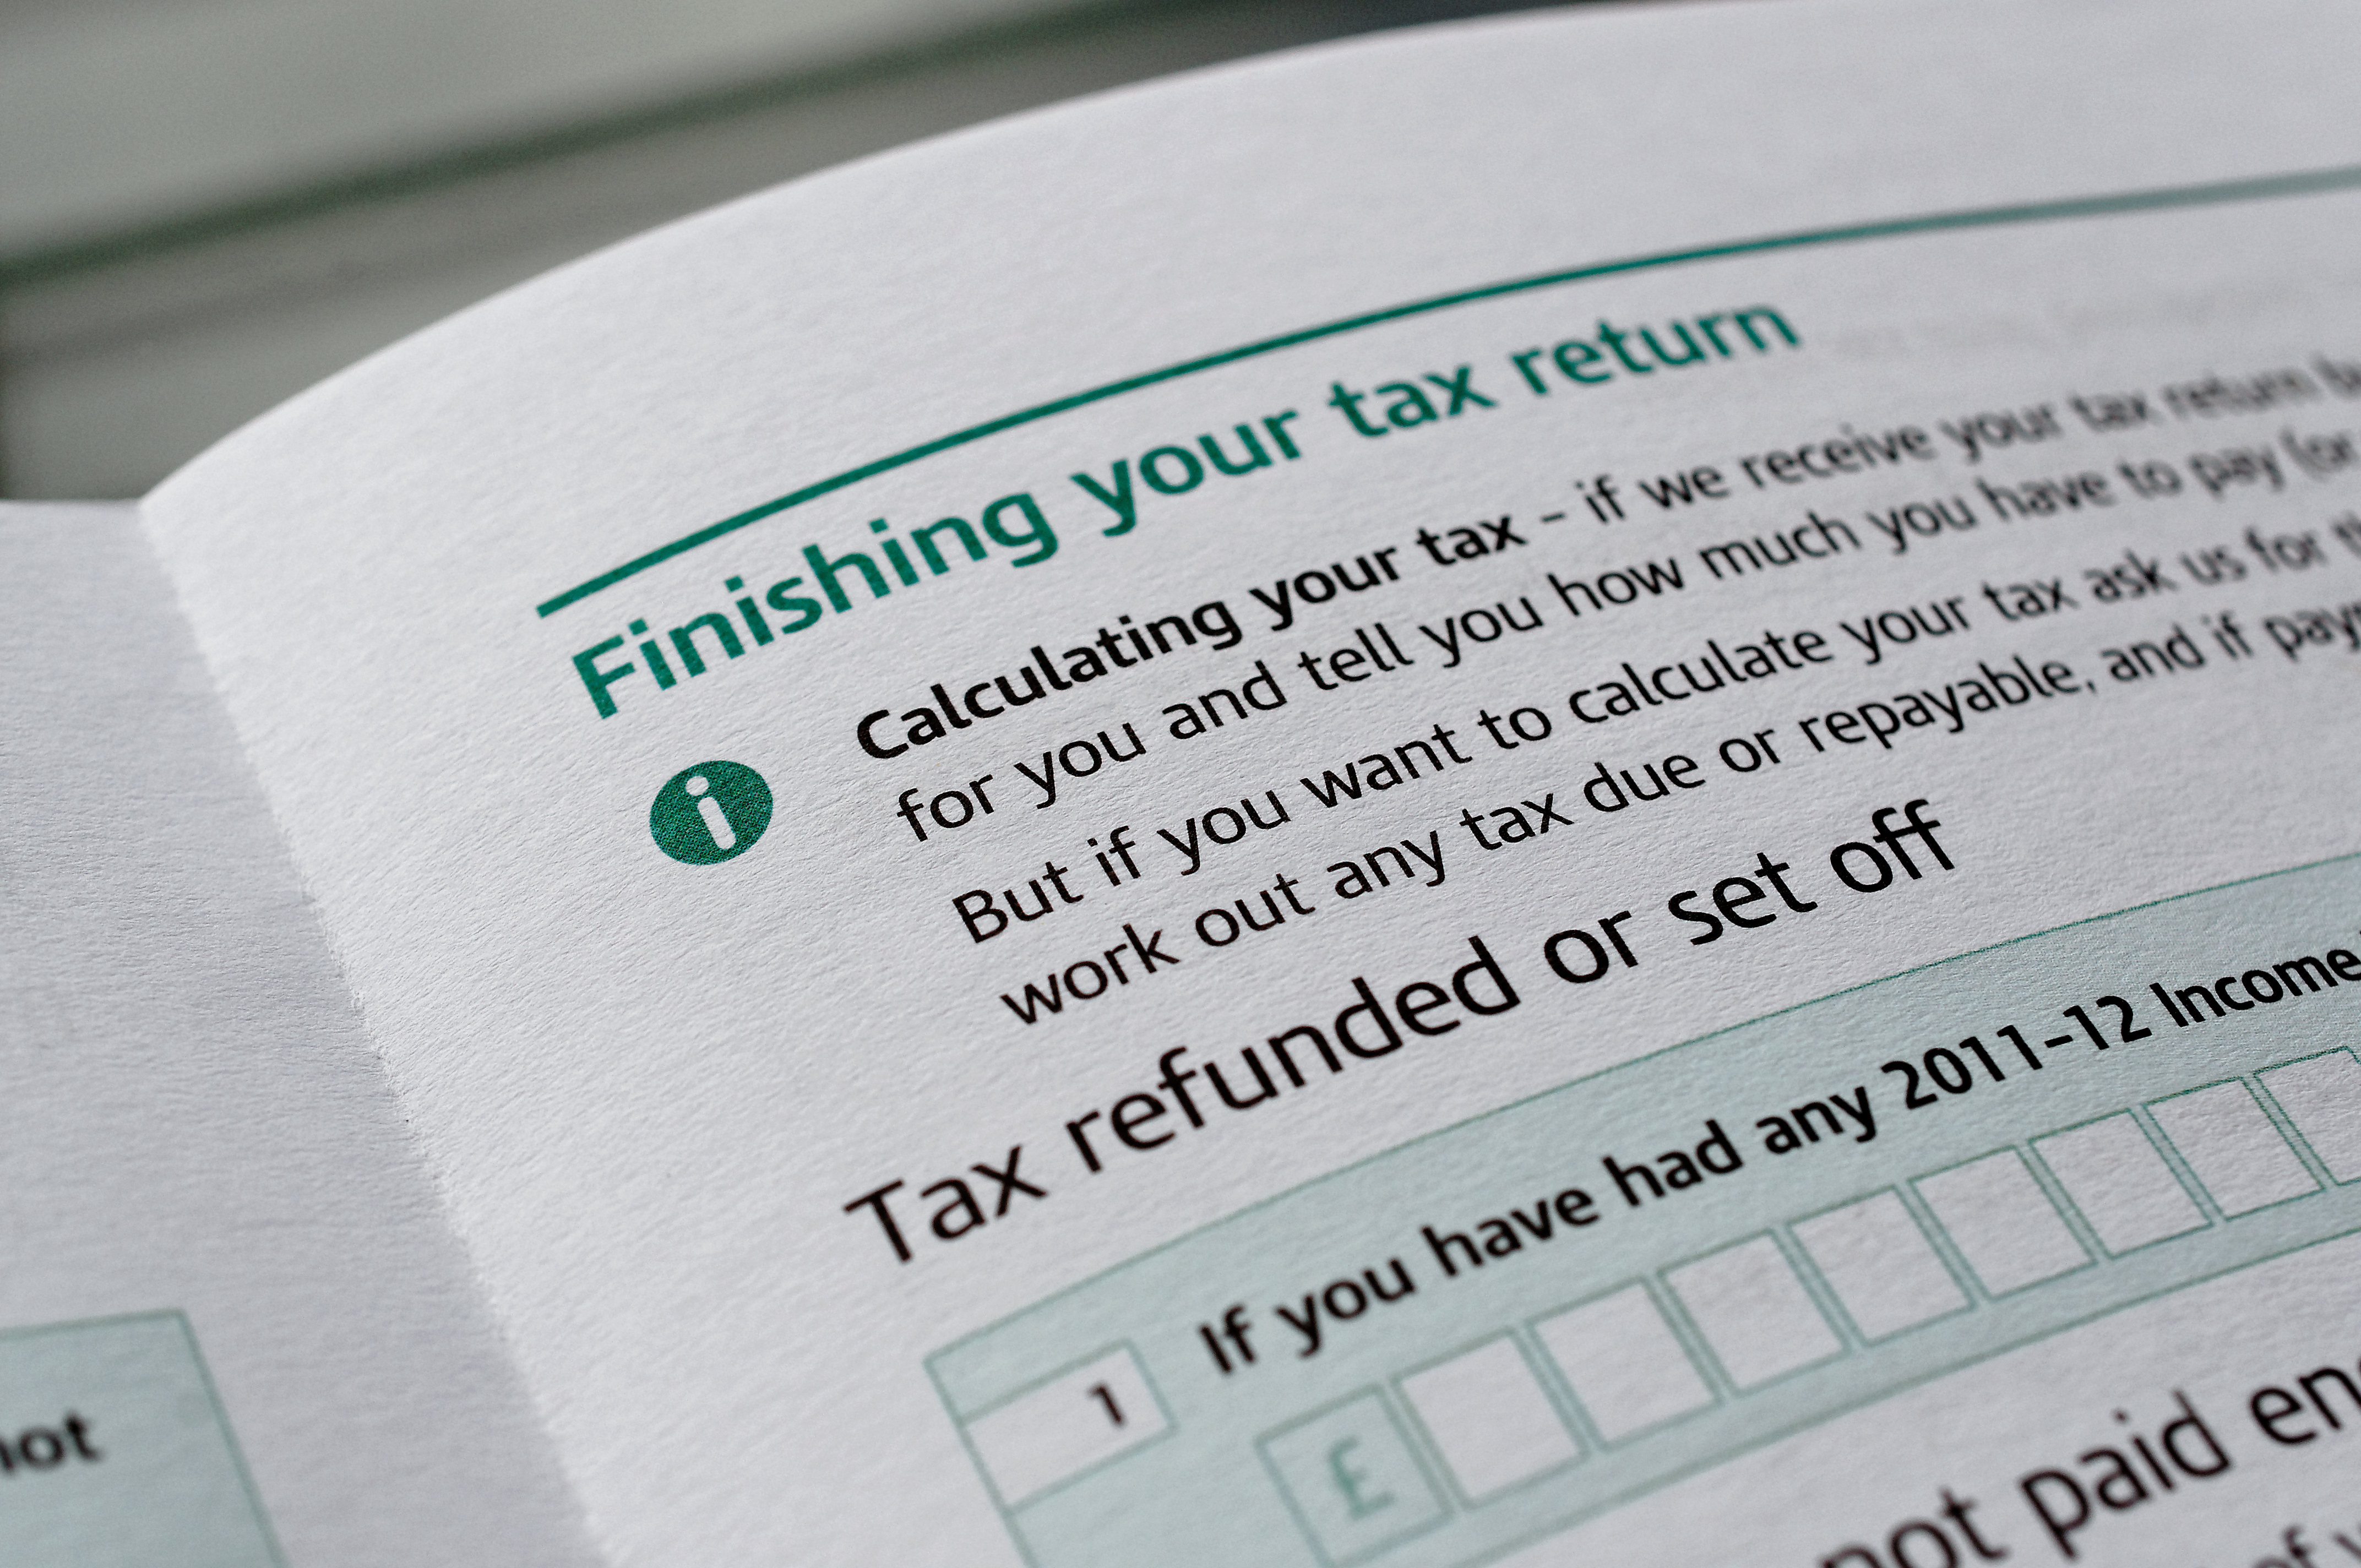 220\/365+1 Tax Return | How to waste a happy Tuesday... | By: DaveCrosby | Flickr - Photo Sharing!